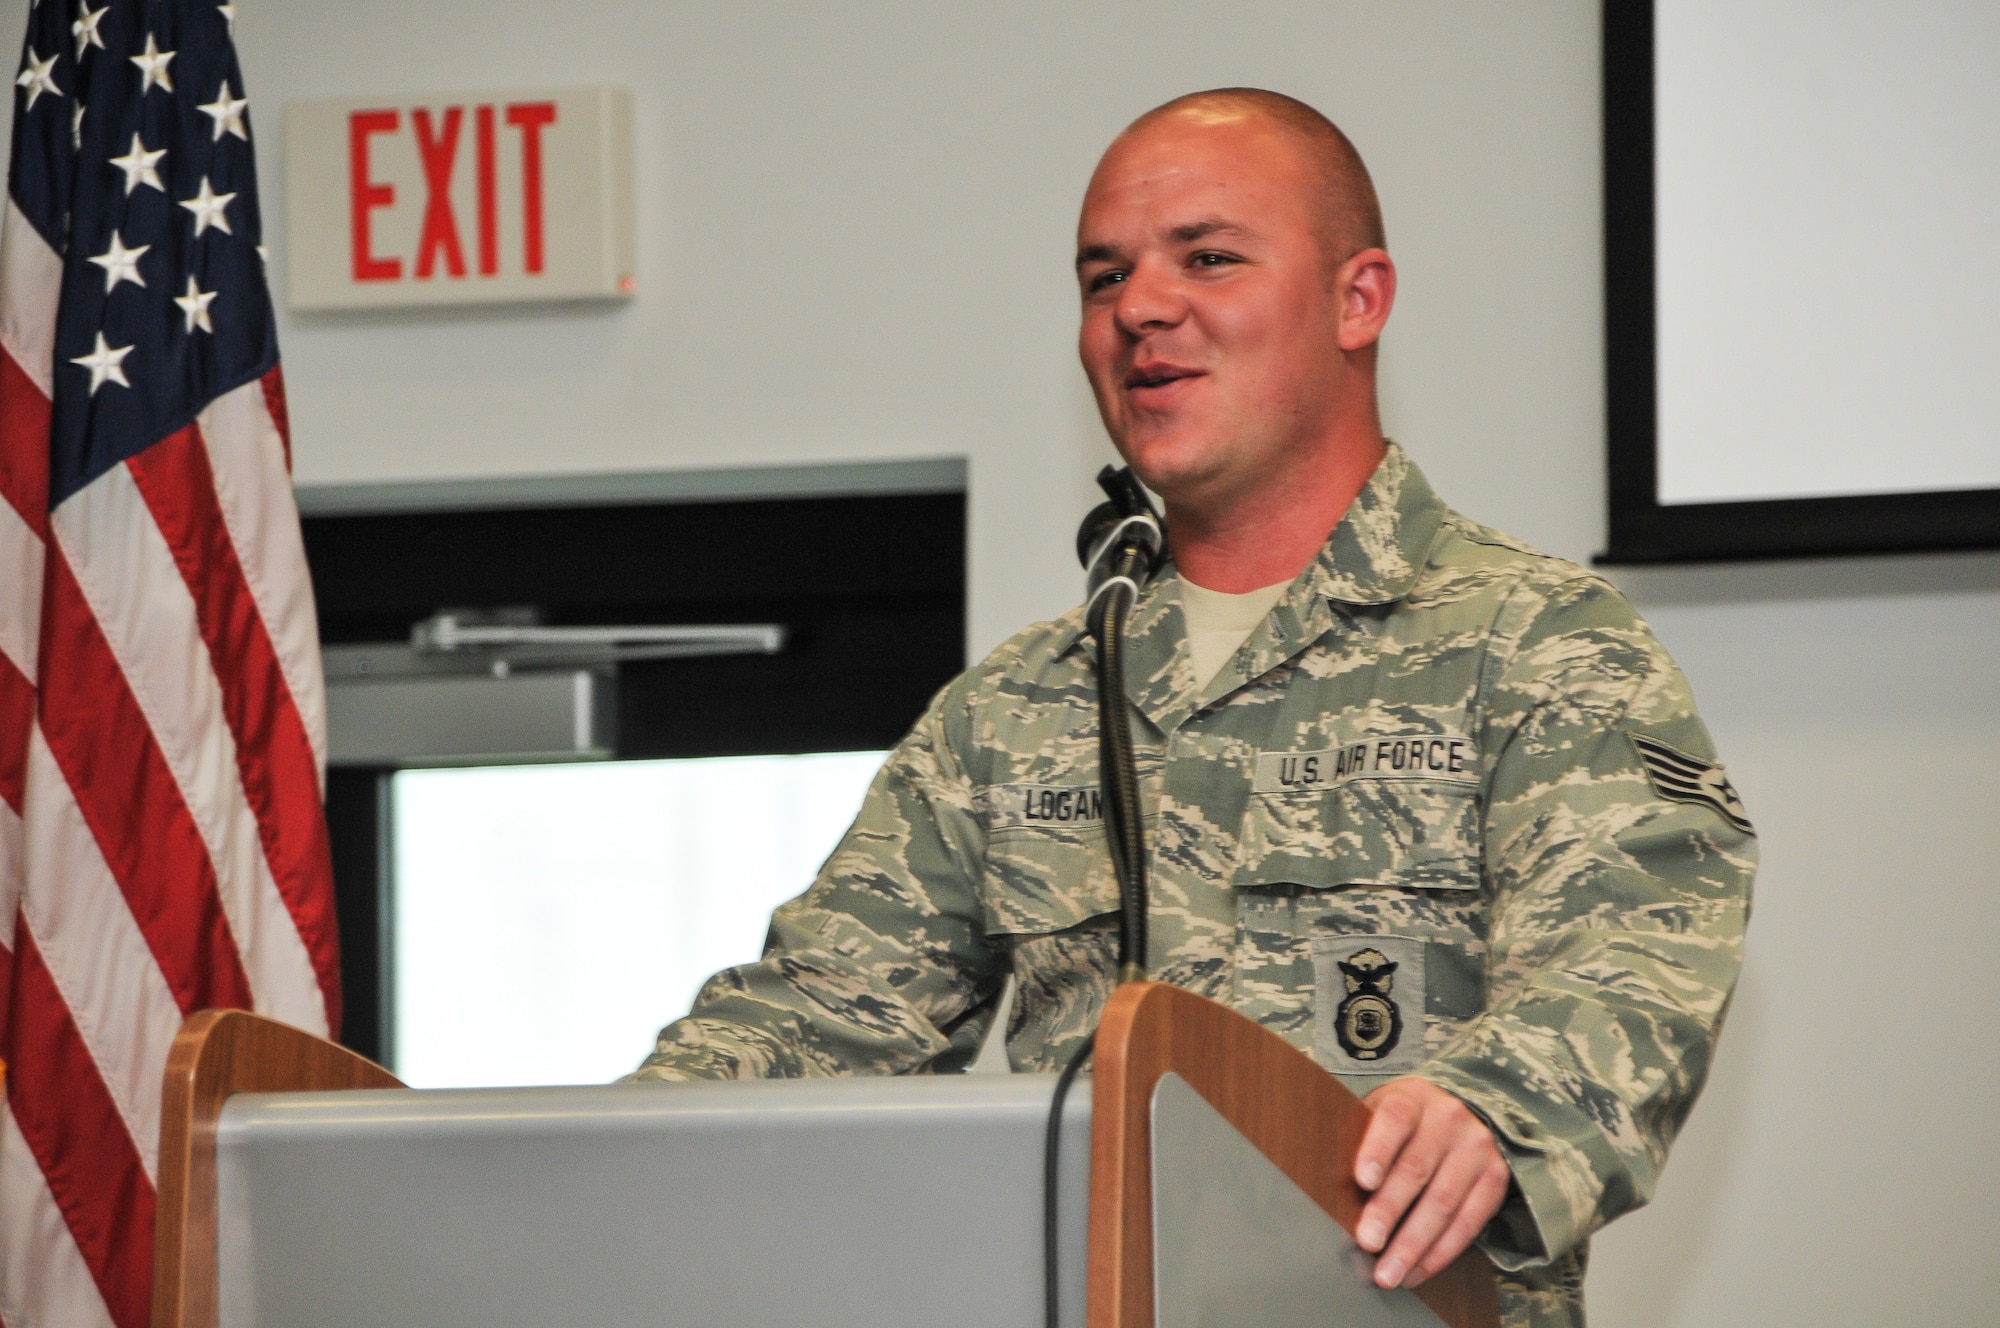 National Guard Staff Sgt. Russell Logan from the 164th Security Forces Squadron, Tennessee Air National Guard, speaks to Airmen of the 165th Airlift Wing at the Georgia Air National Guard base at Savannah/Hilton Head International Airport in Savannah, Ga., May 22, 2012. Logan's left leg was amputated due to wounds resulting from a detonated landmine at Bagram Airfield in Afghanistan. (National Guard photo by Tech. Sgt. Charles Delano/Released)